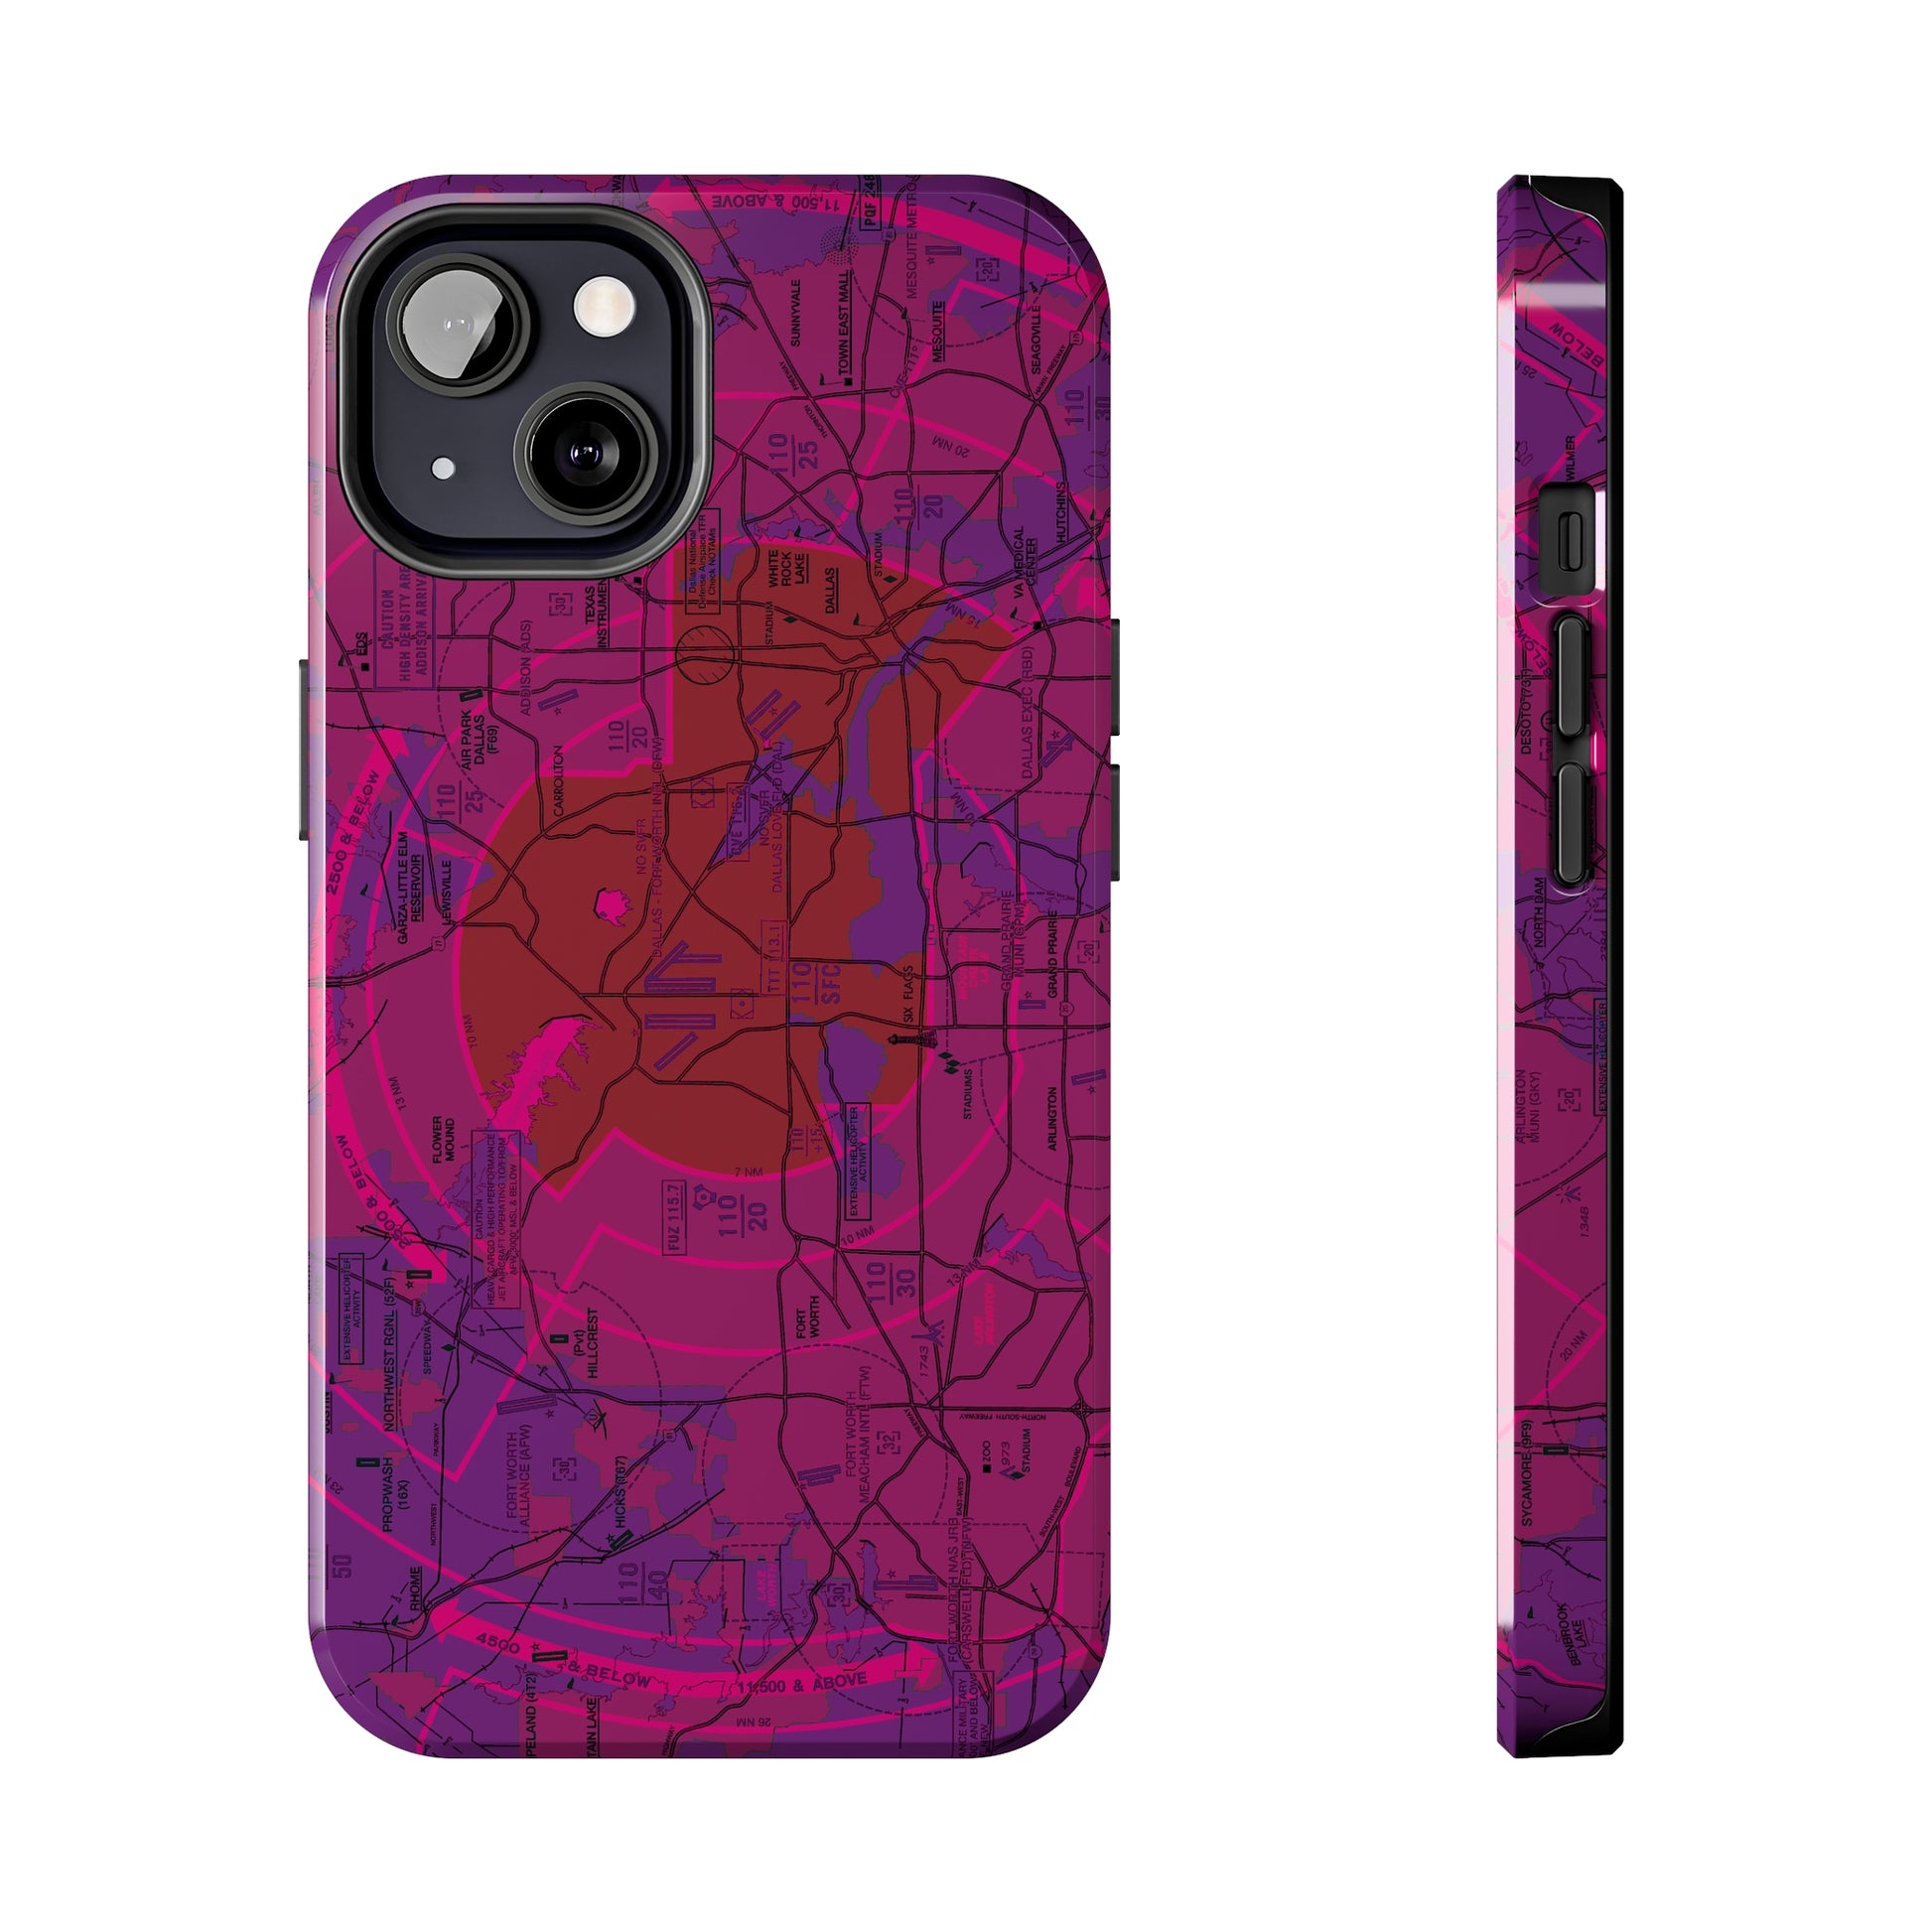 Dallas - Ft. Worth Flyway Chart tough phone cases (purple)